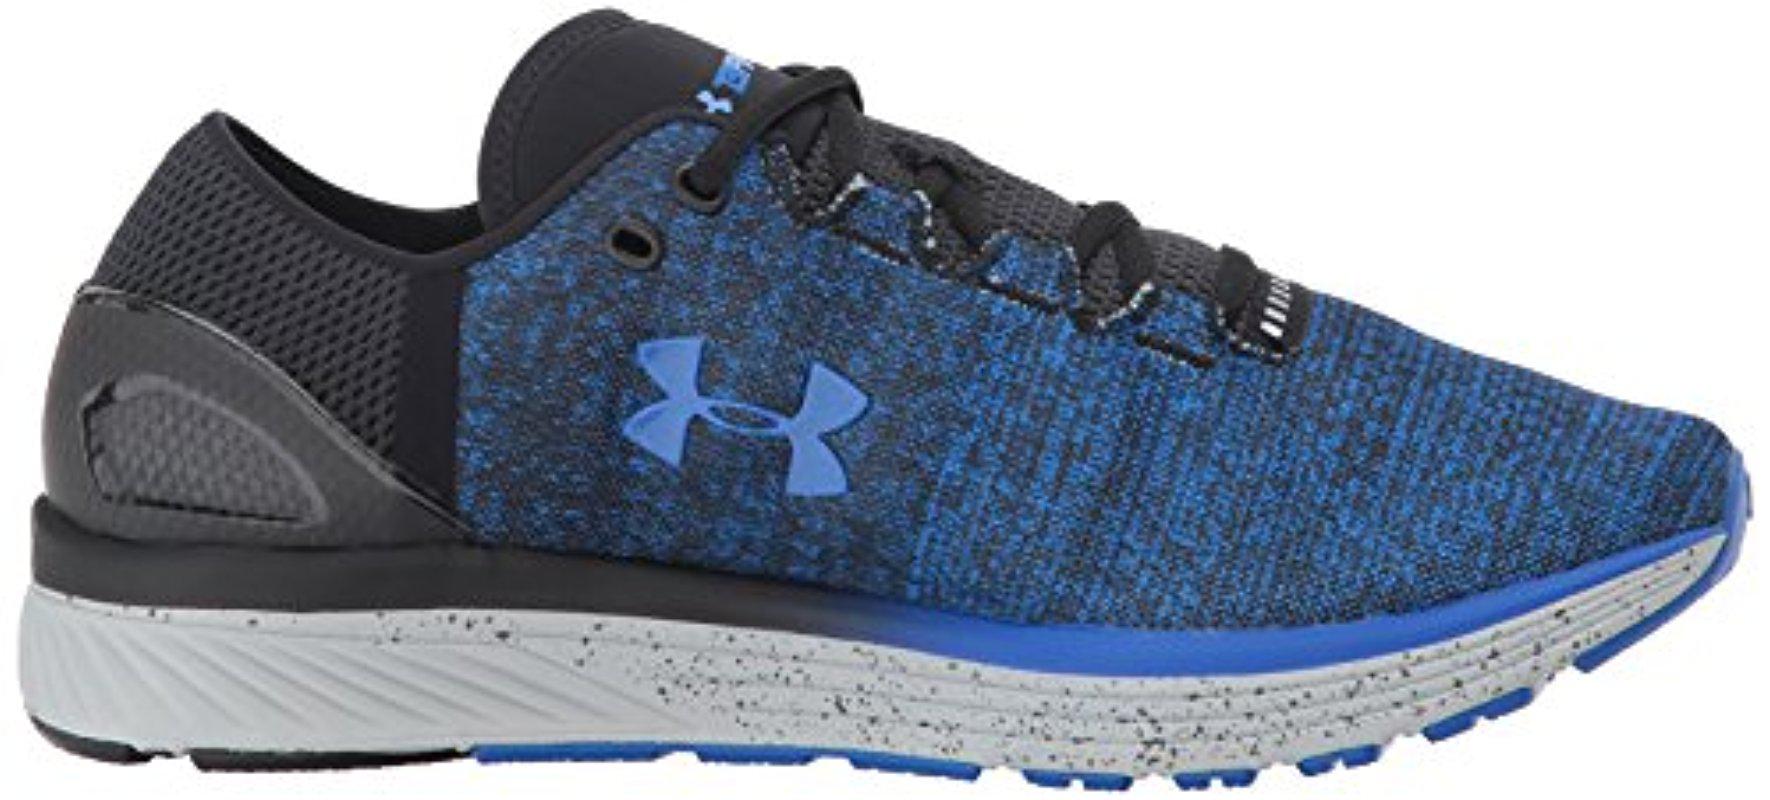 Under Armour Rubber Charged Bandit 3 